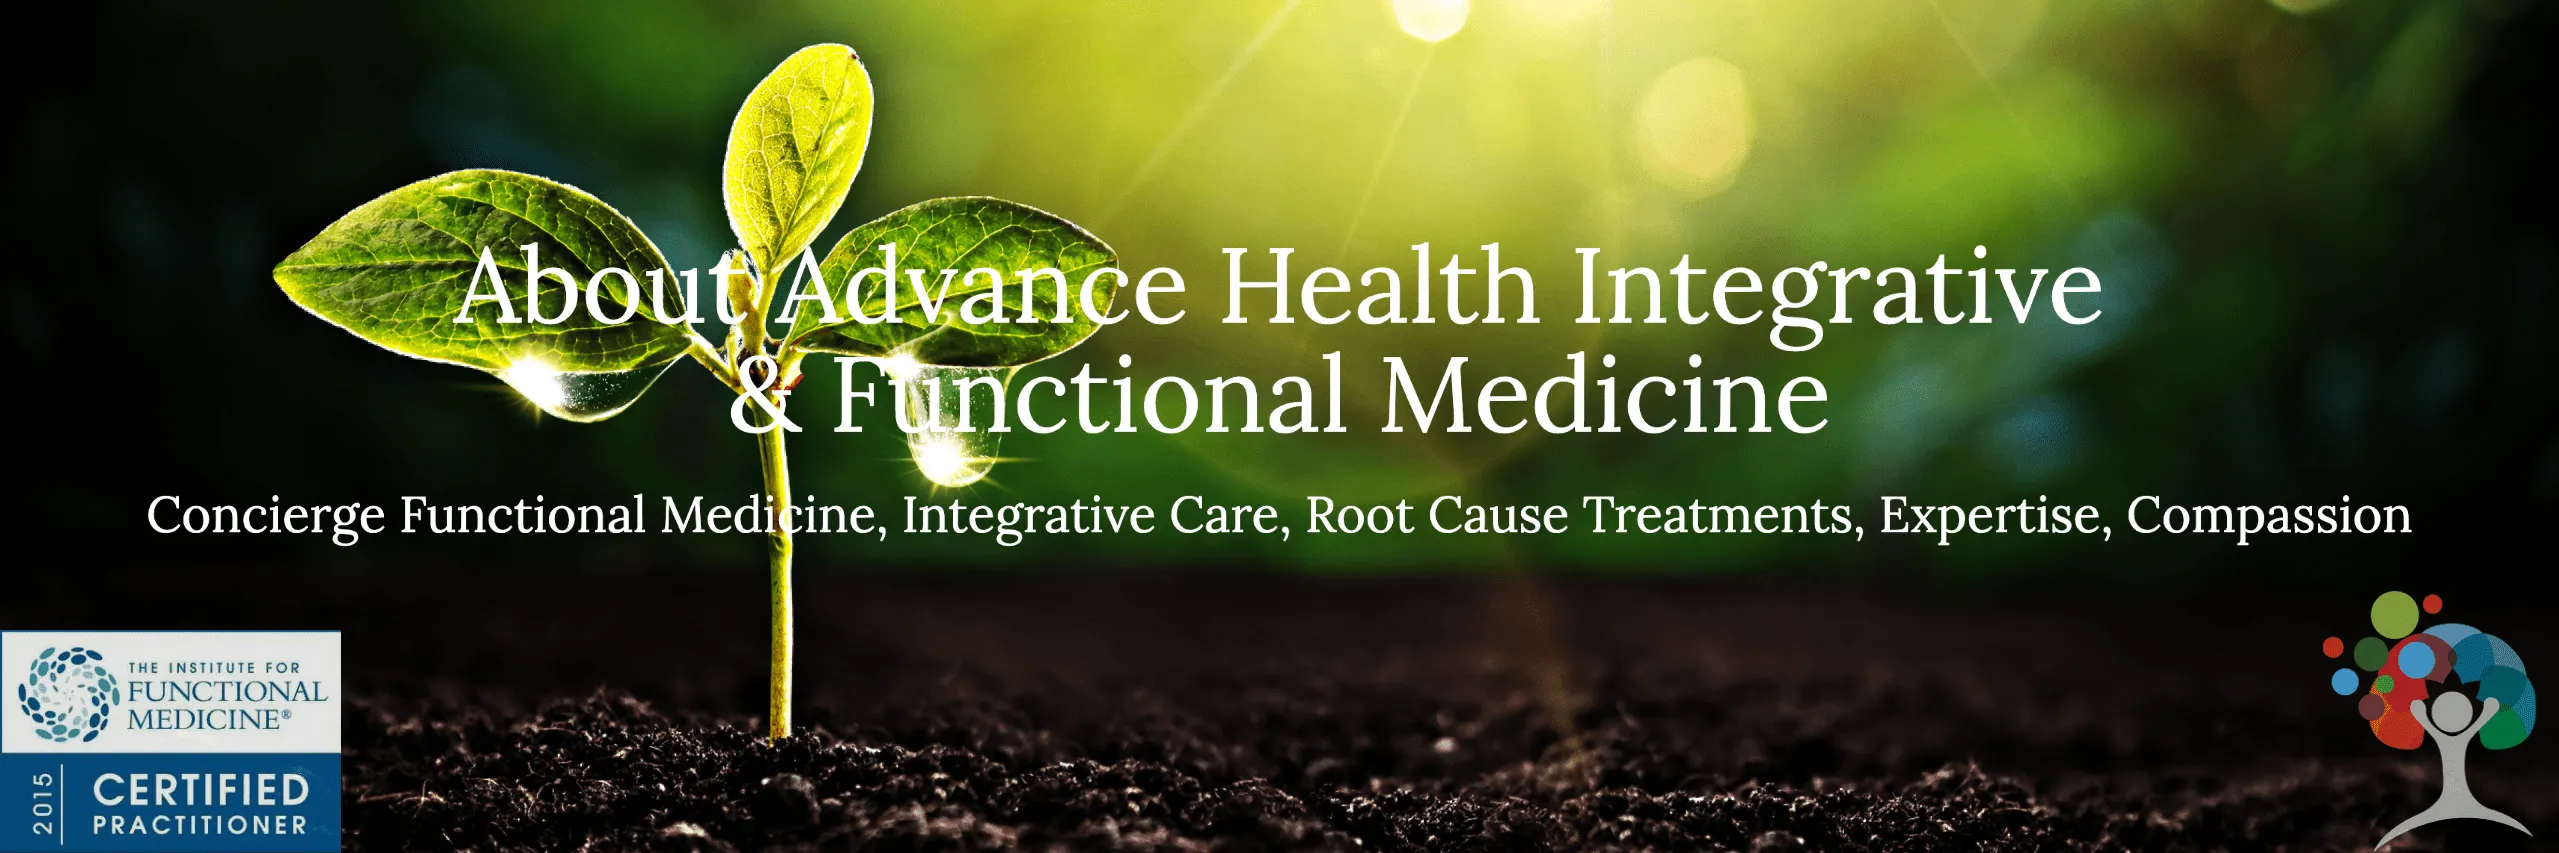 About advanced health integrative and functional medicine.